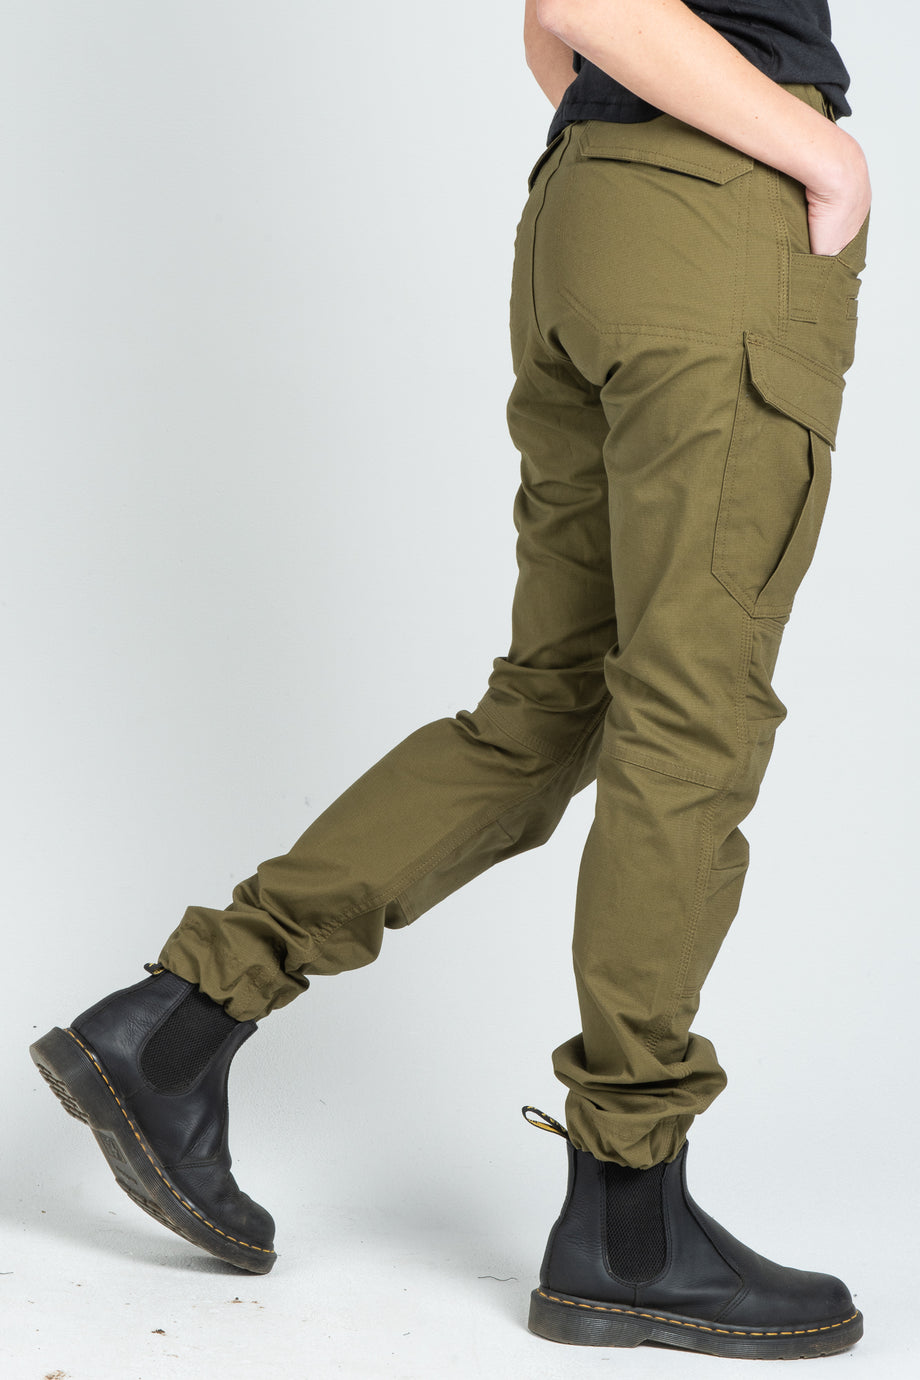 Ready Set Cargo in Ripstop Olive Green, Womens Workwear